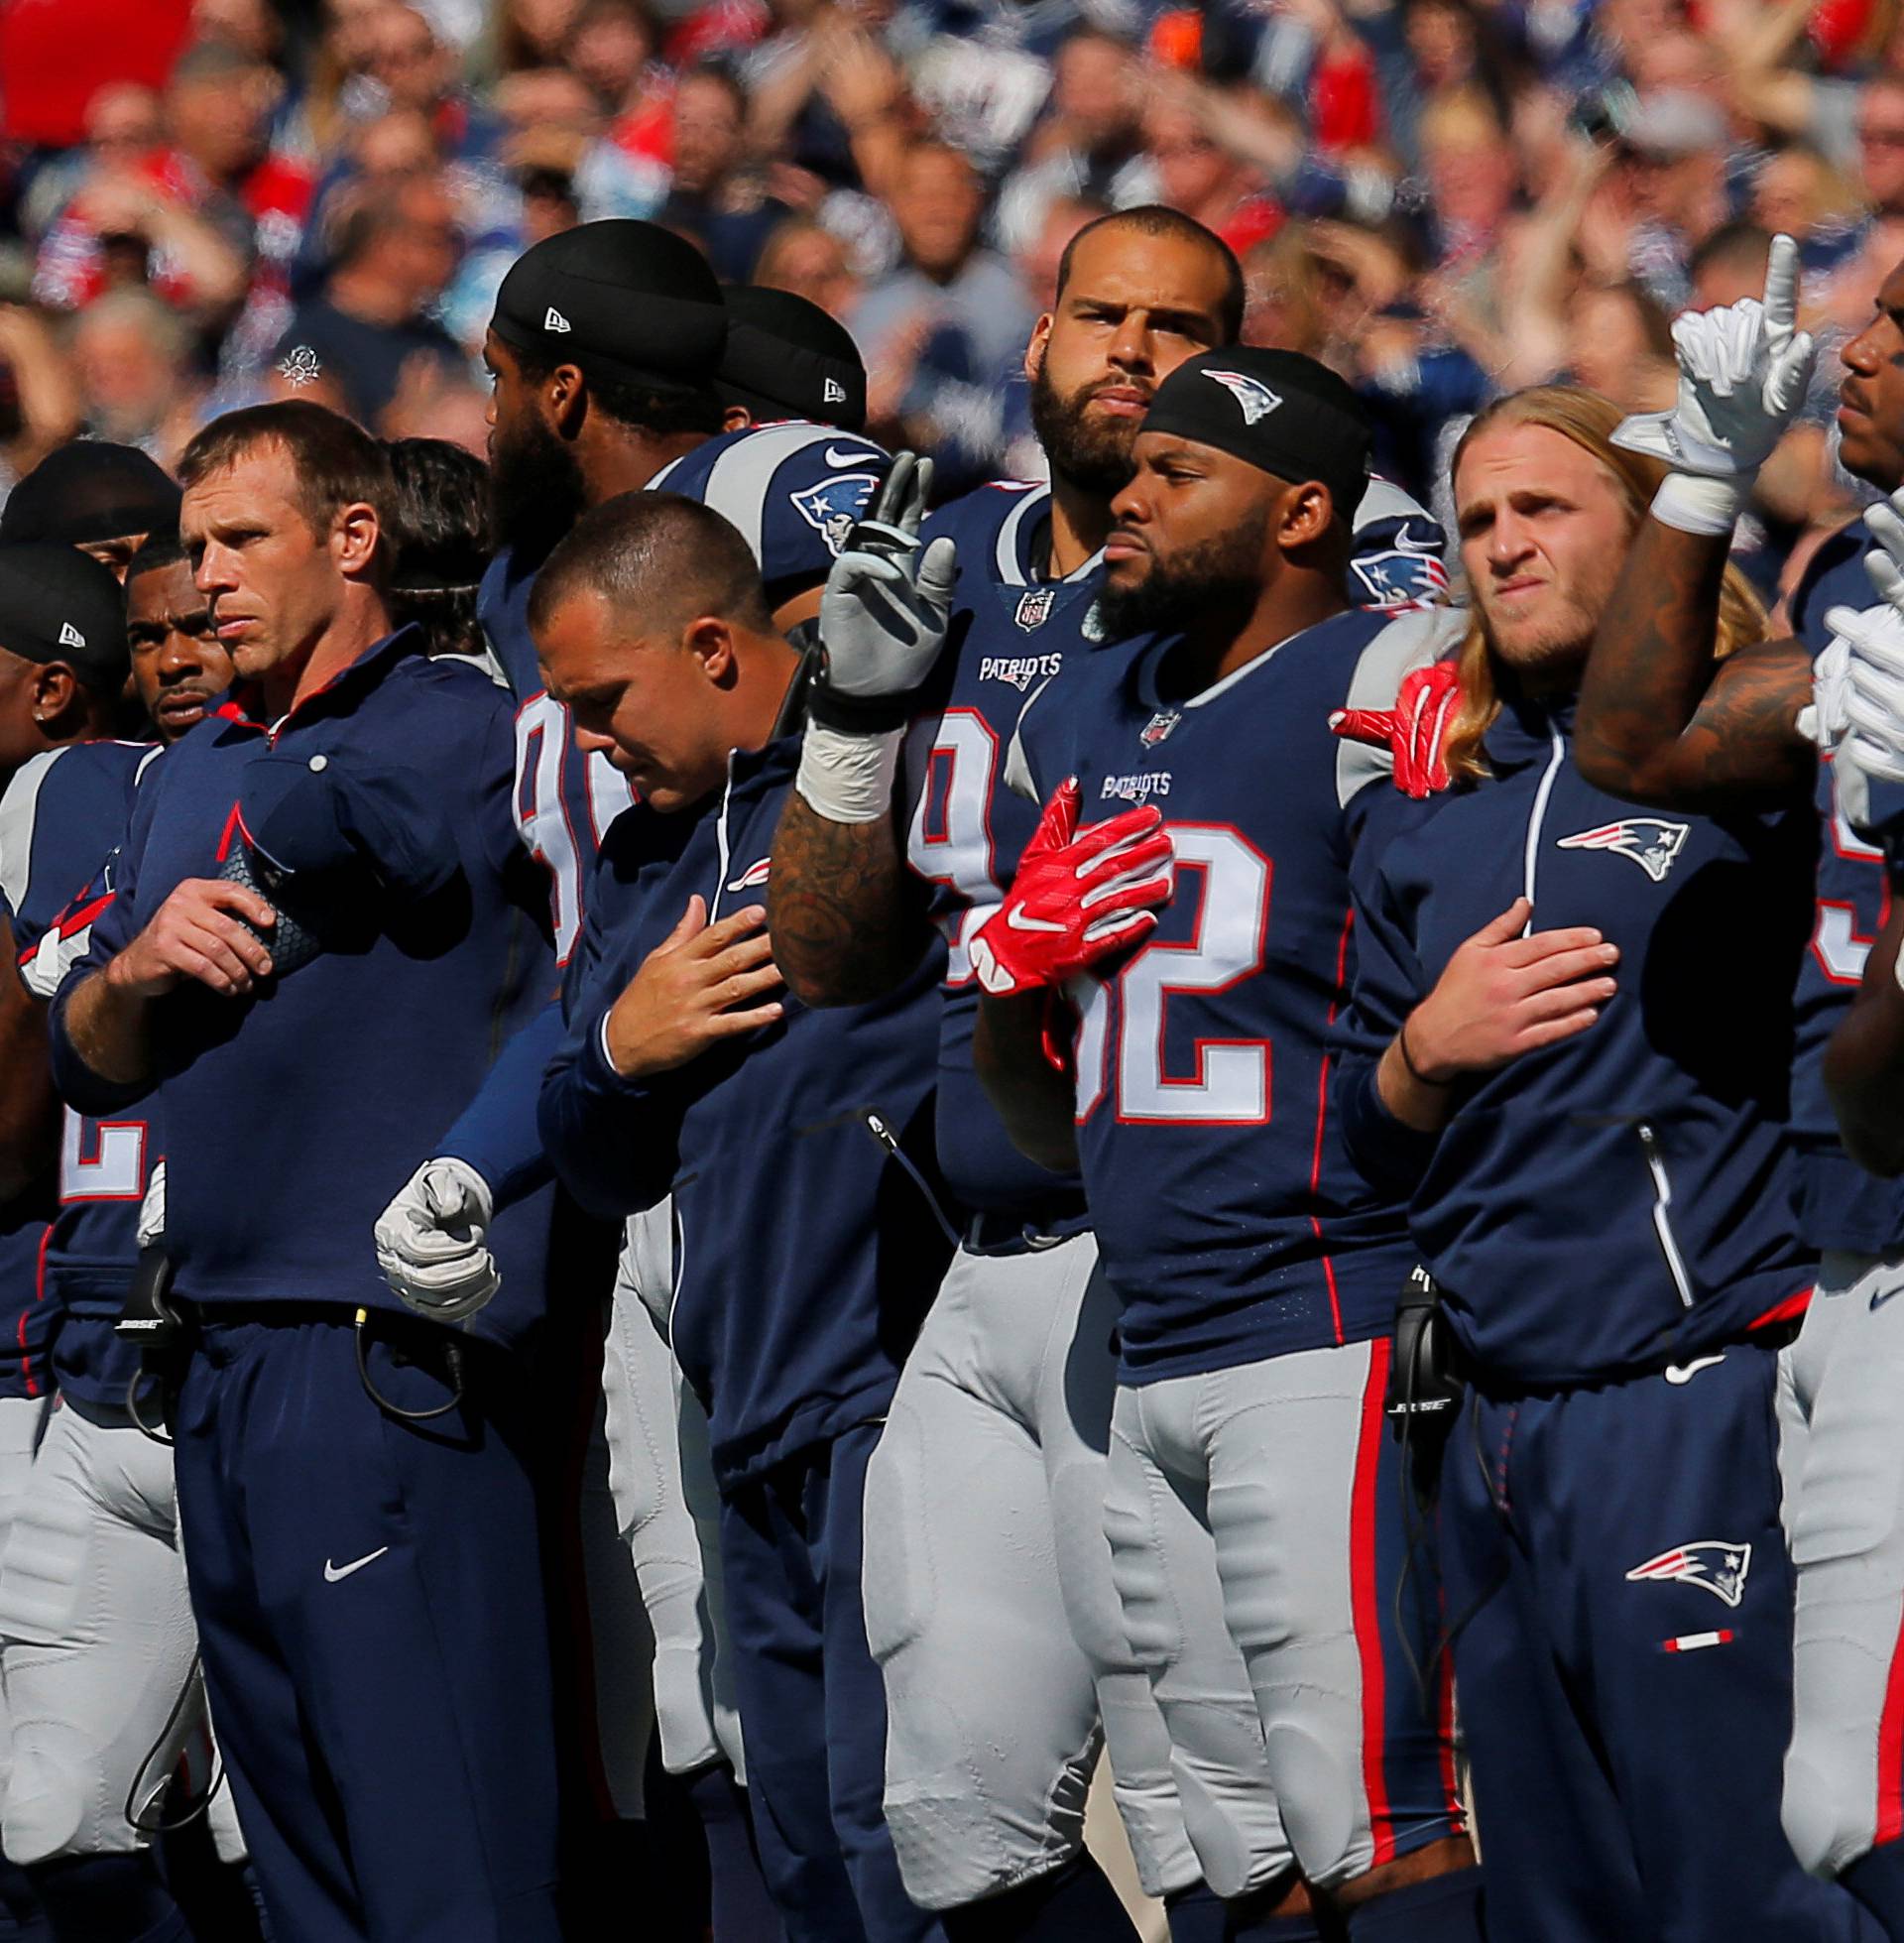 The New England Patriots players stand together for the U.S. National Anthem before their NFL football game against the Carolina Panthers in Foxborough